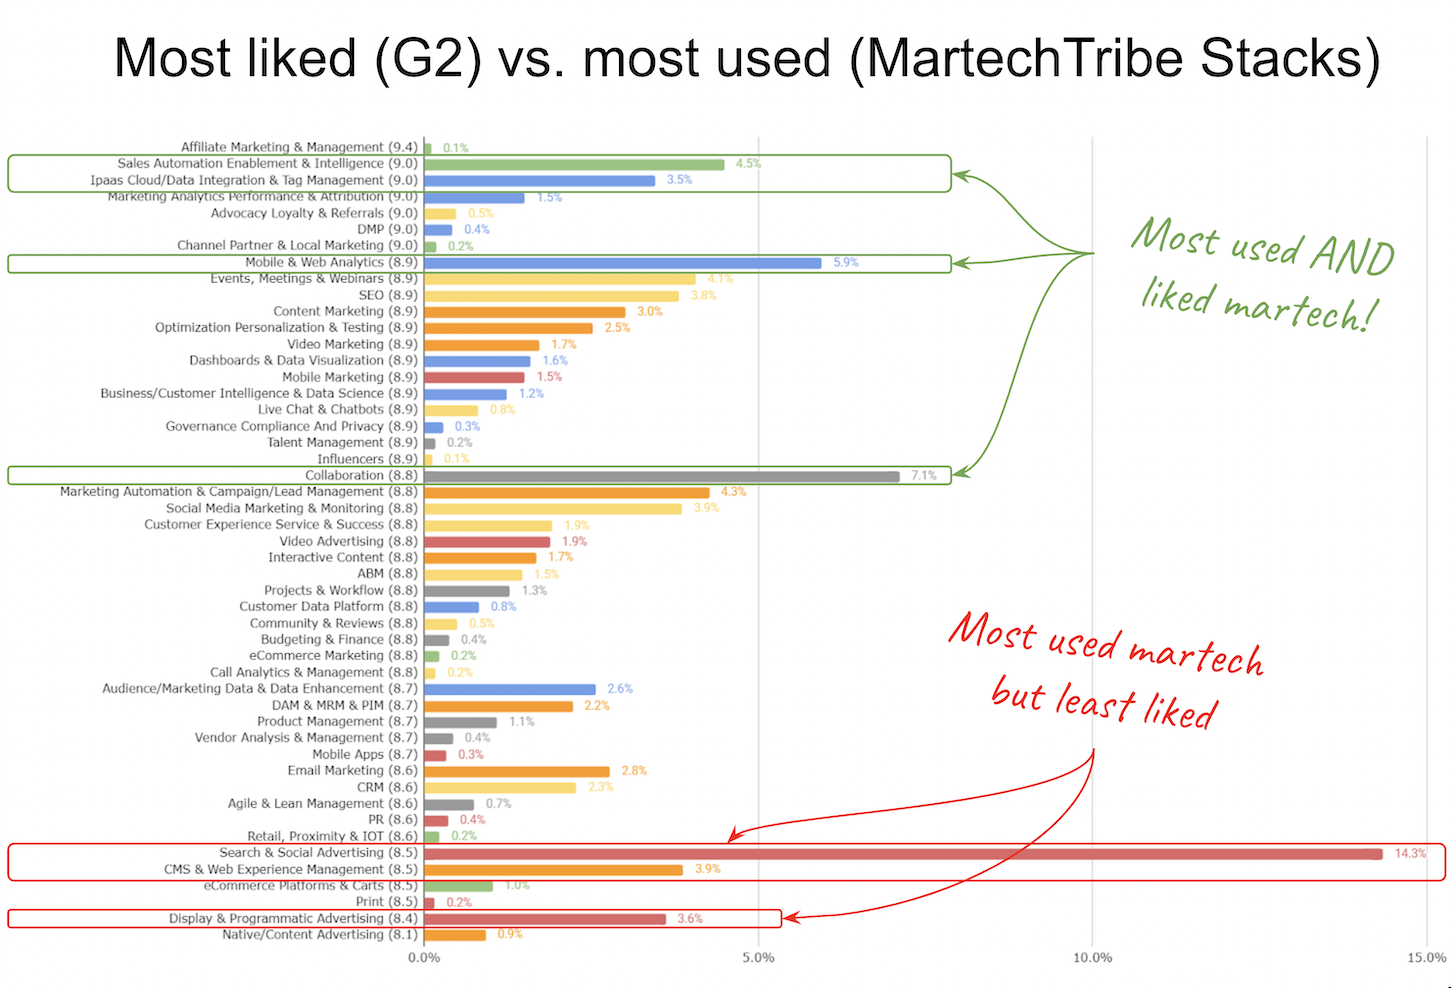 Martech Products: Ratings vs.  Popularity on Martech Stacks